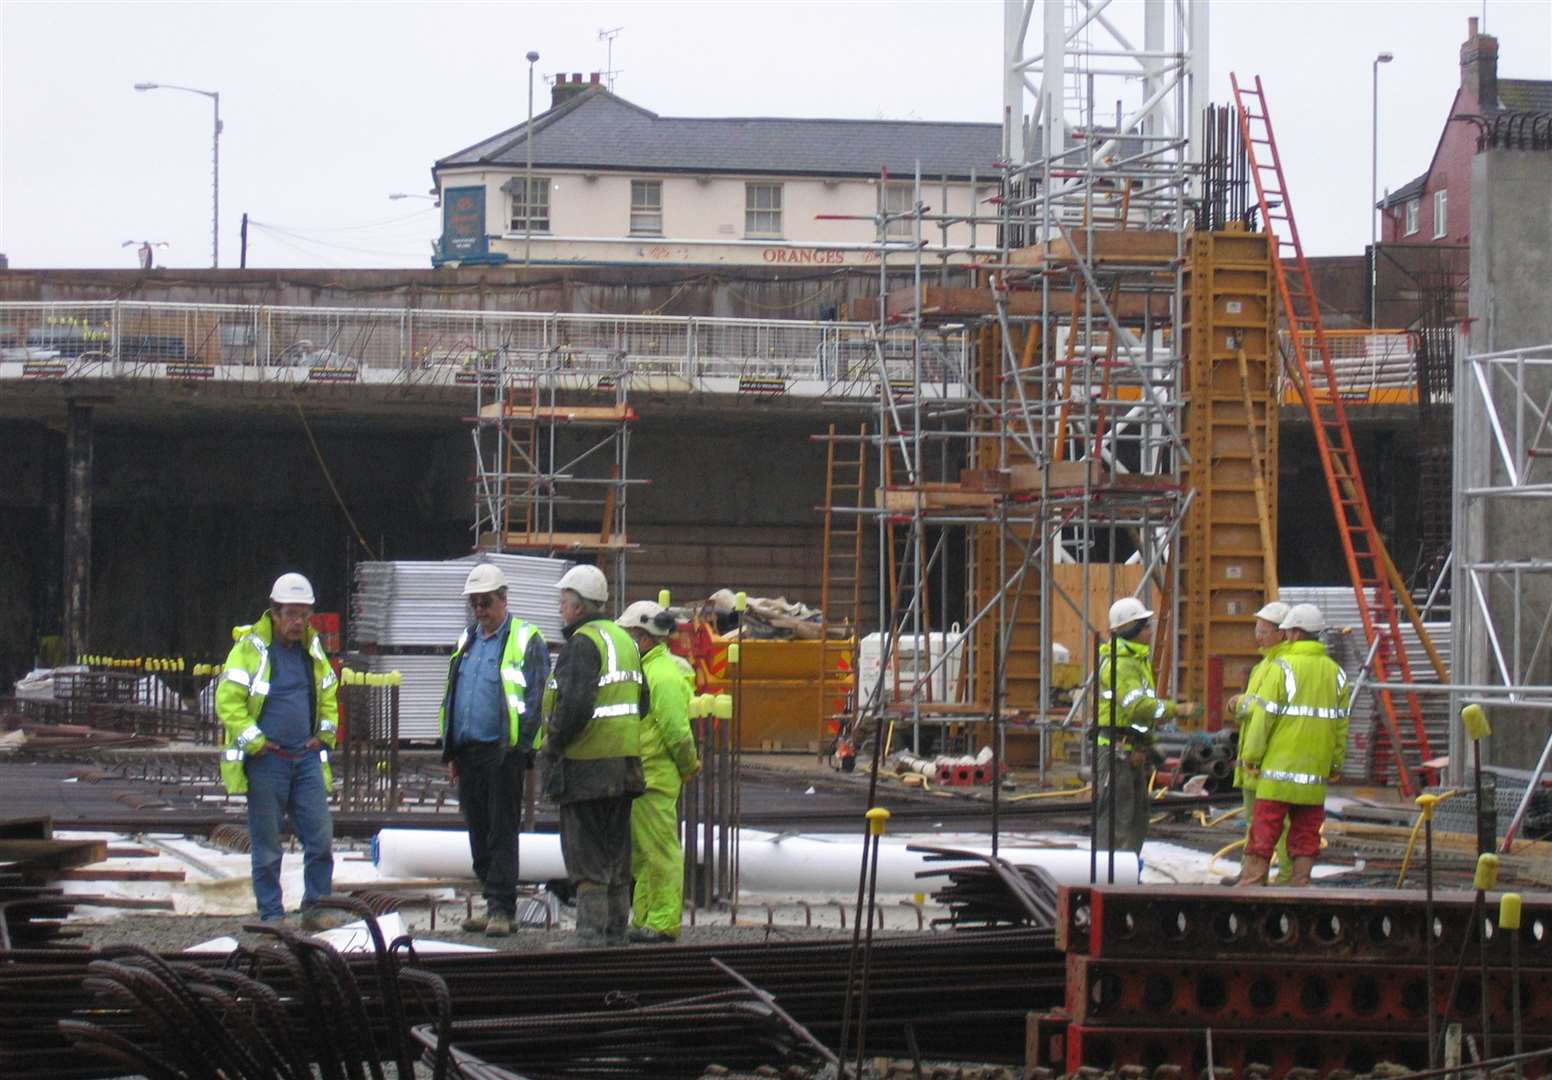 The County Square extension under construction in December 2006; note the former Oranges pub in the background